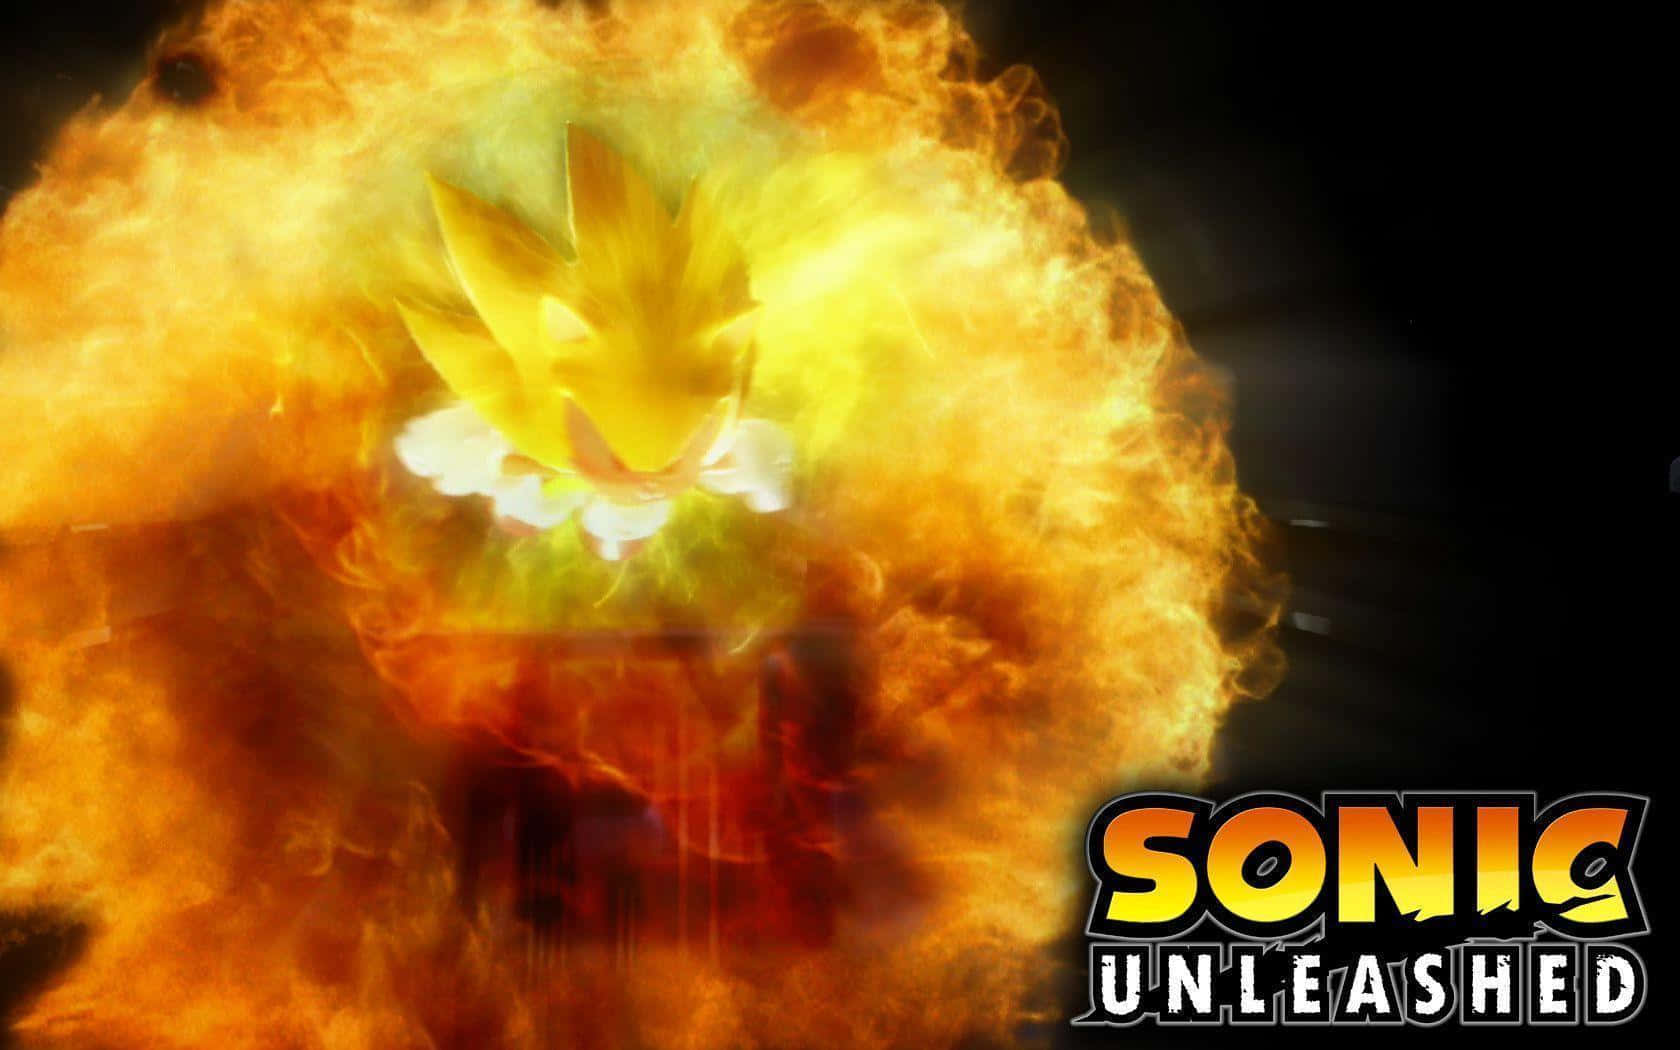 Get Ready to Blast Off with Super Sonic